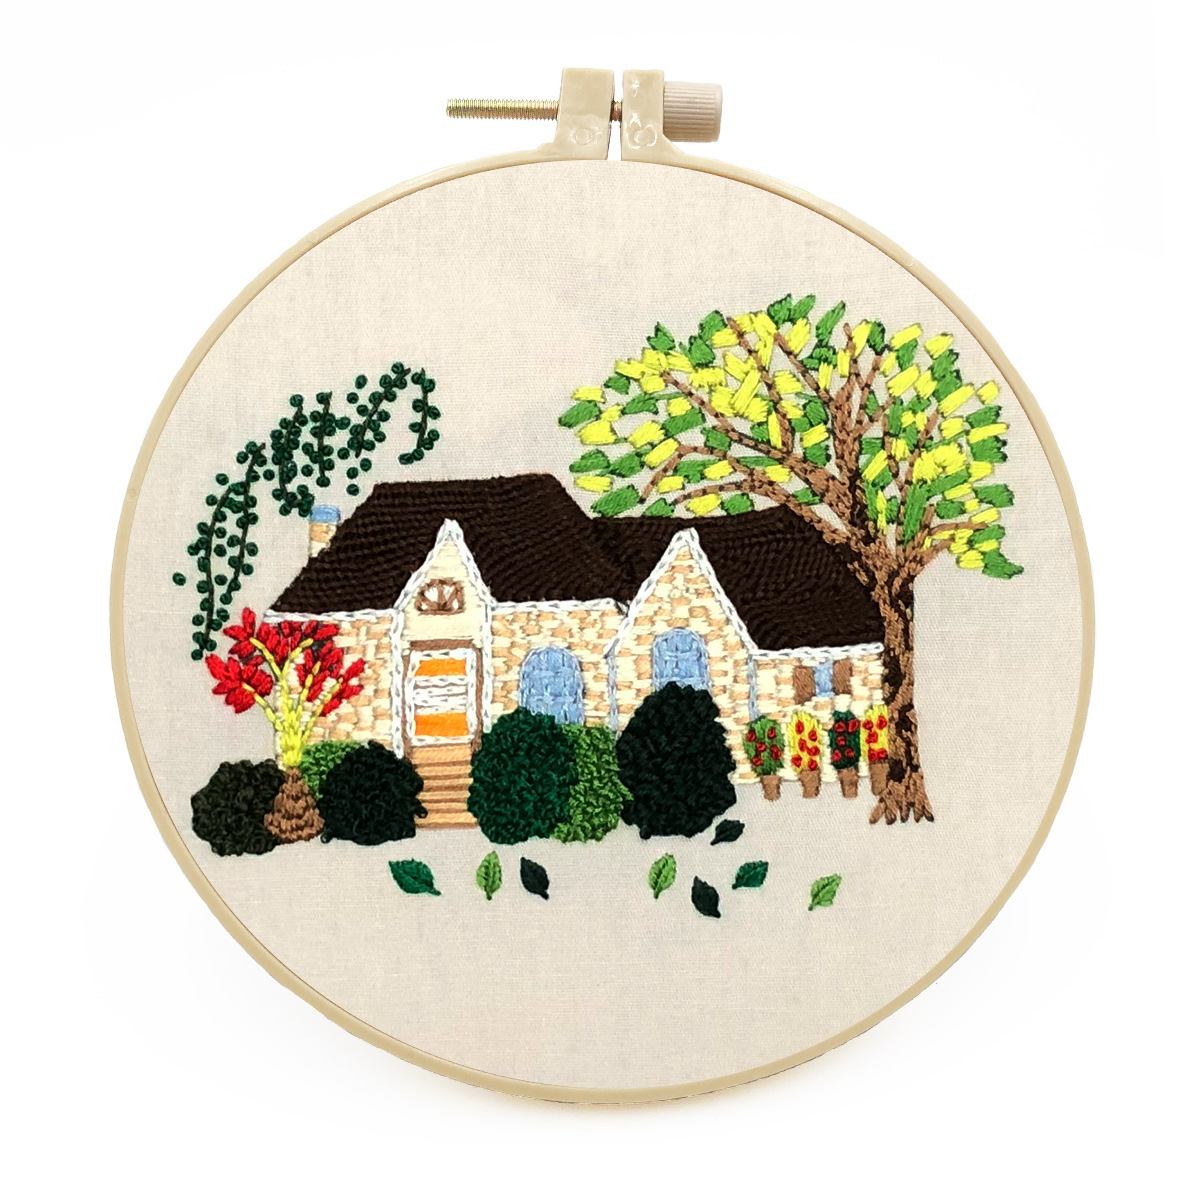 DIY Handmade Embroidery Cross stitch kit - Country House Pattern